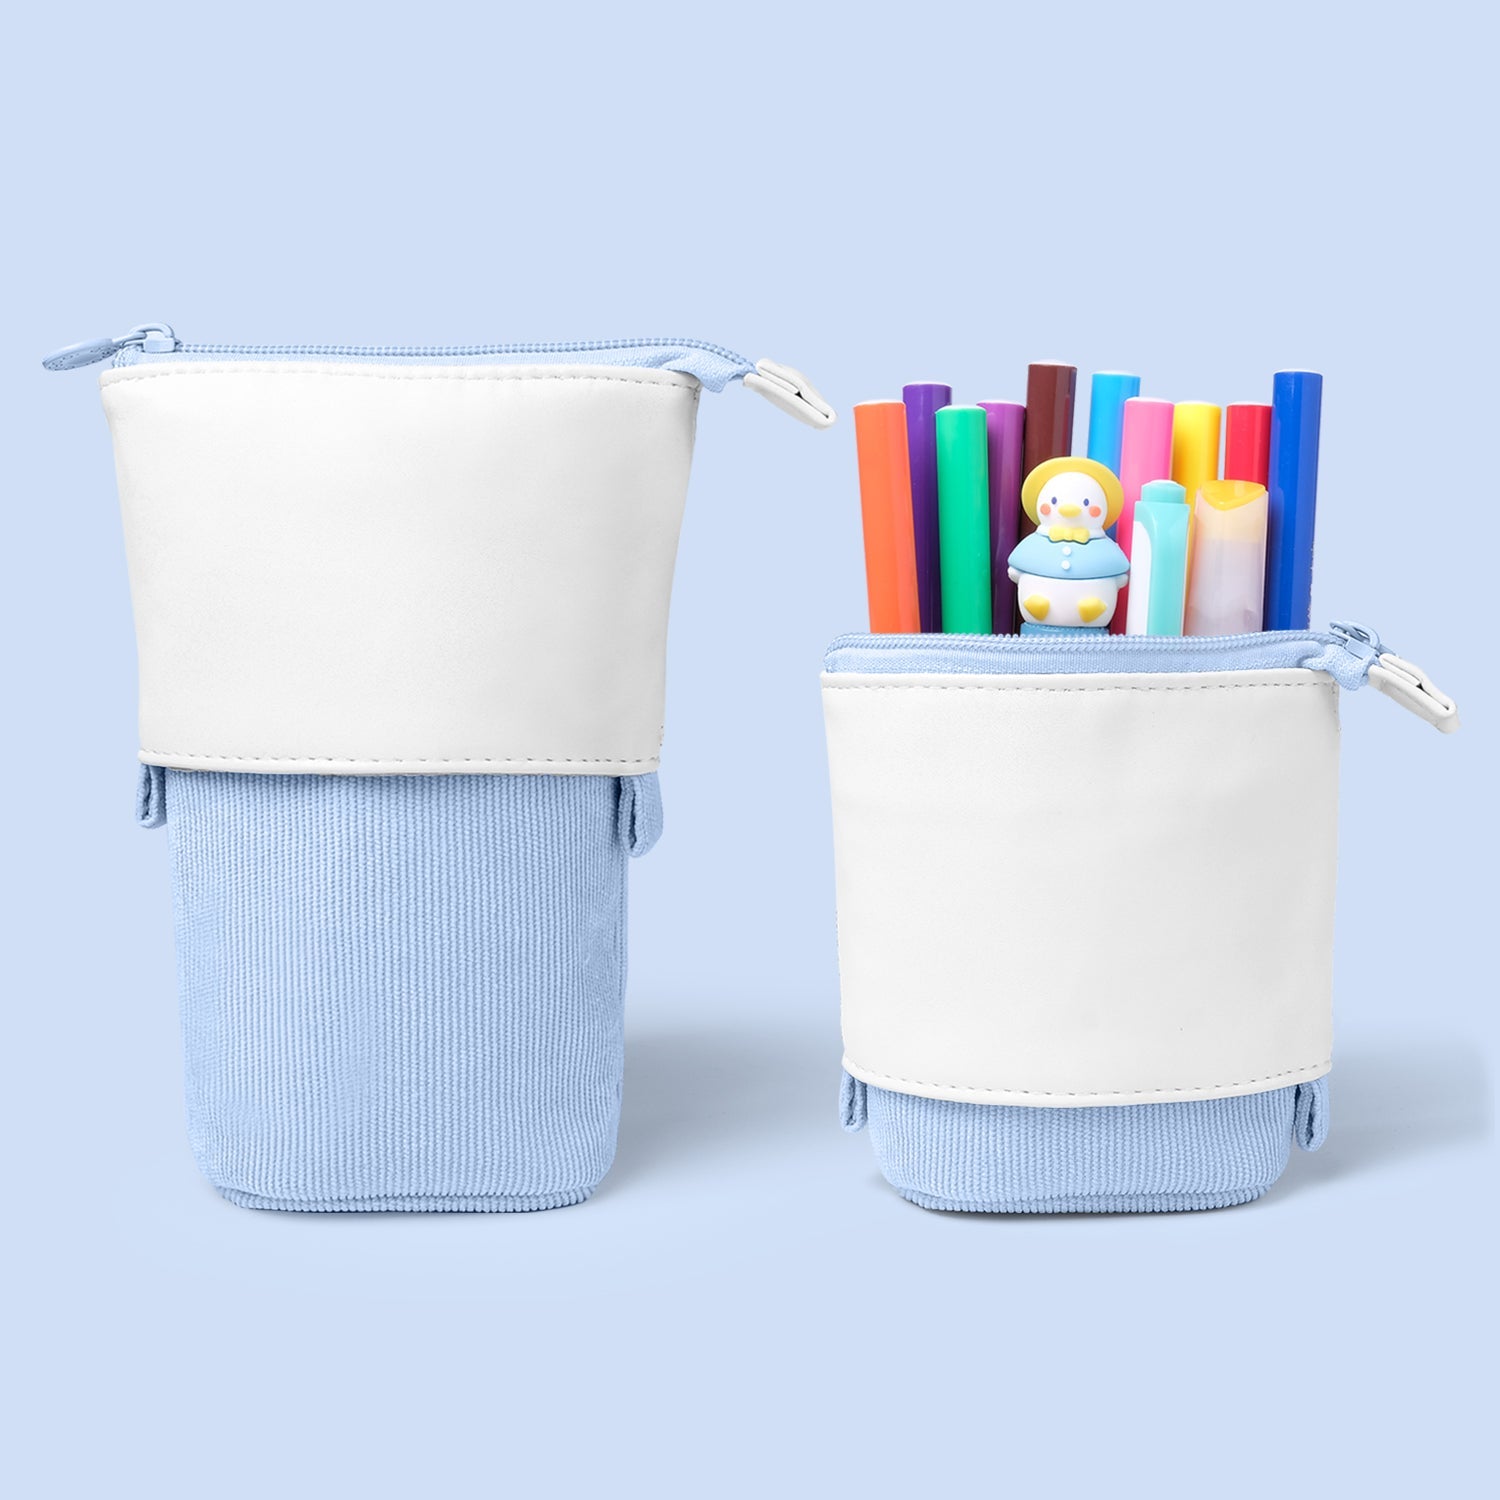 Dual-Use Standing Pouch (FREE)